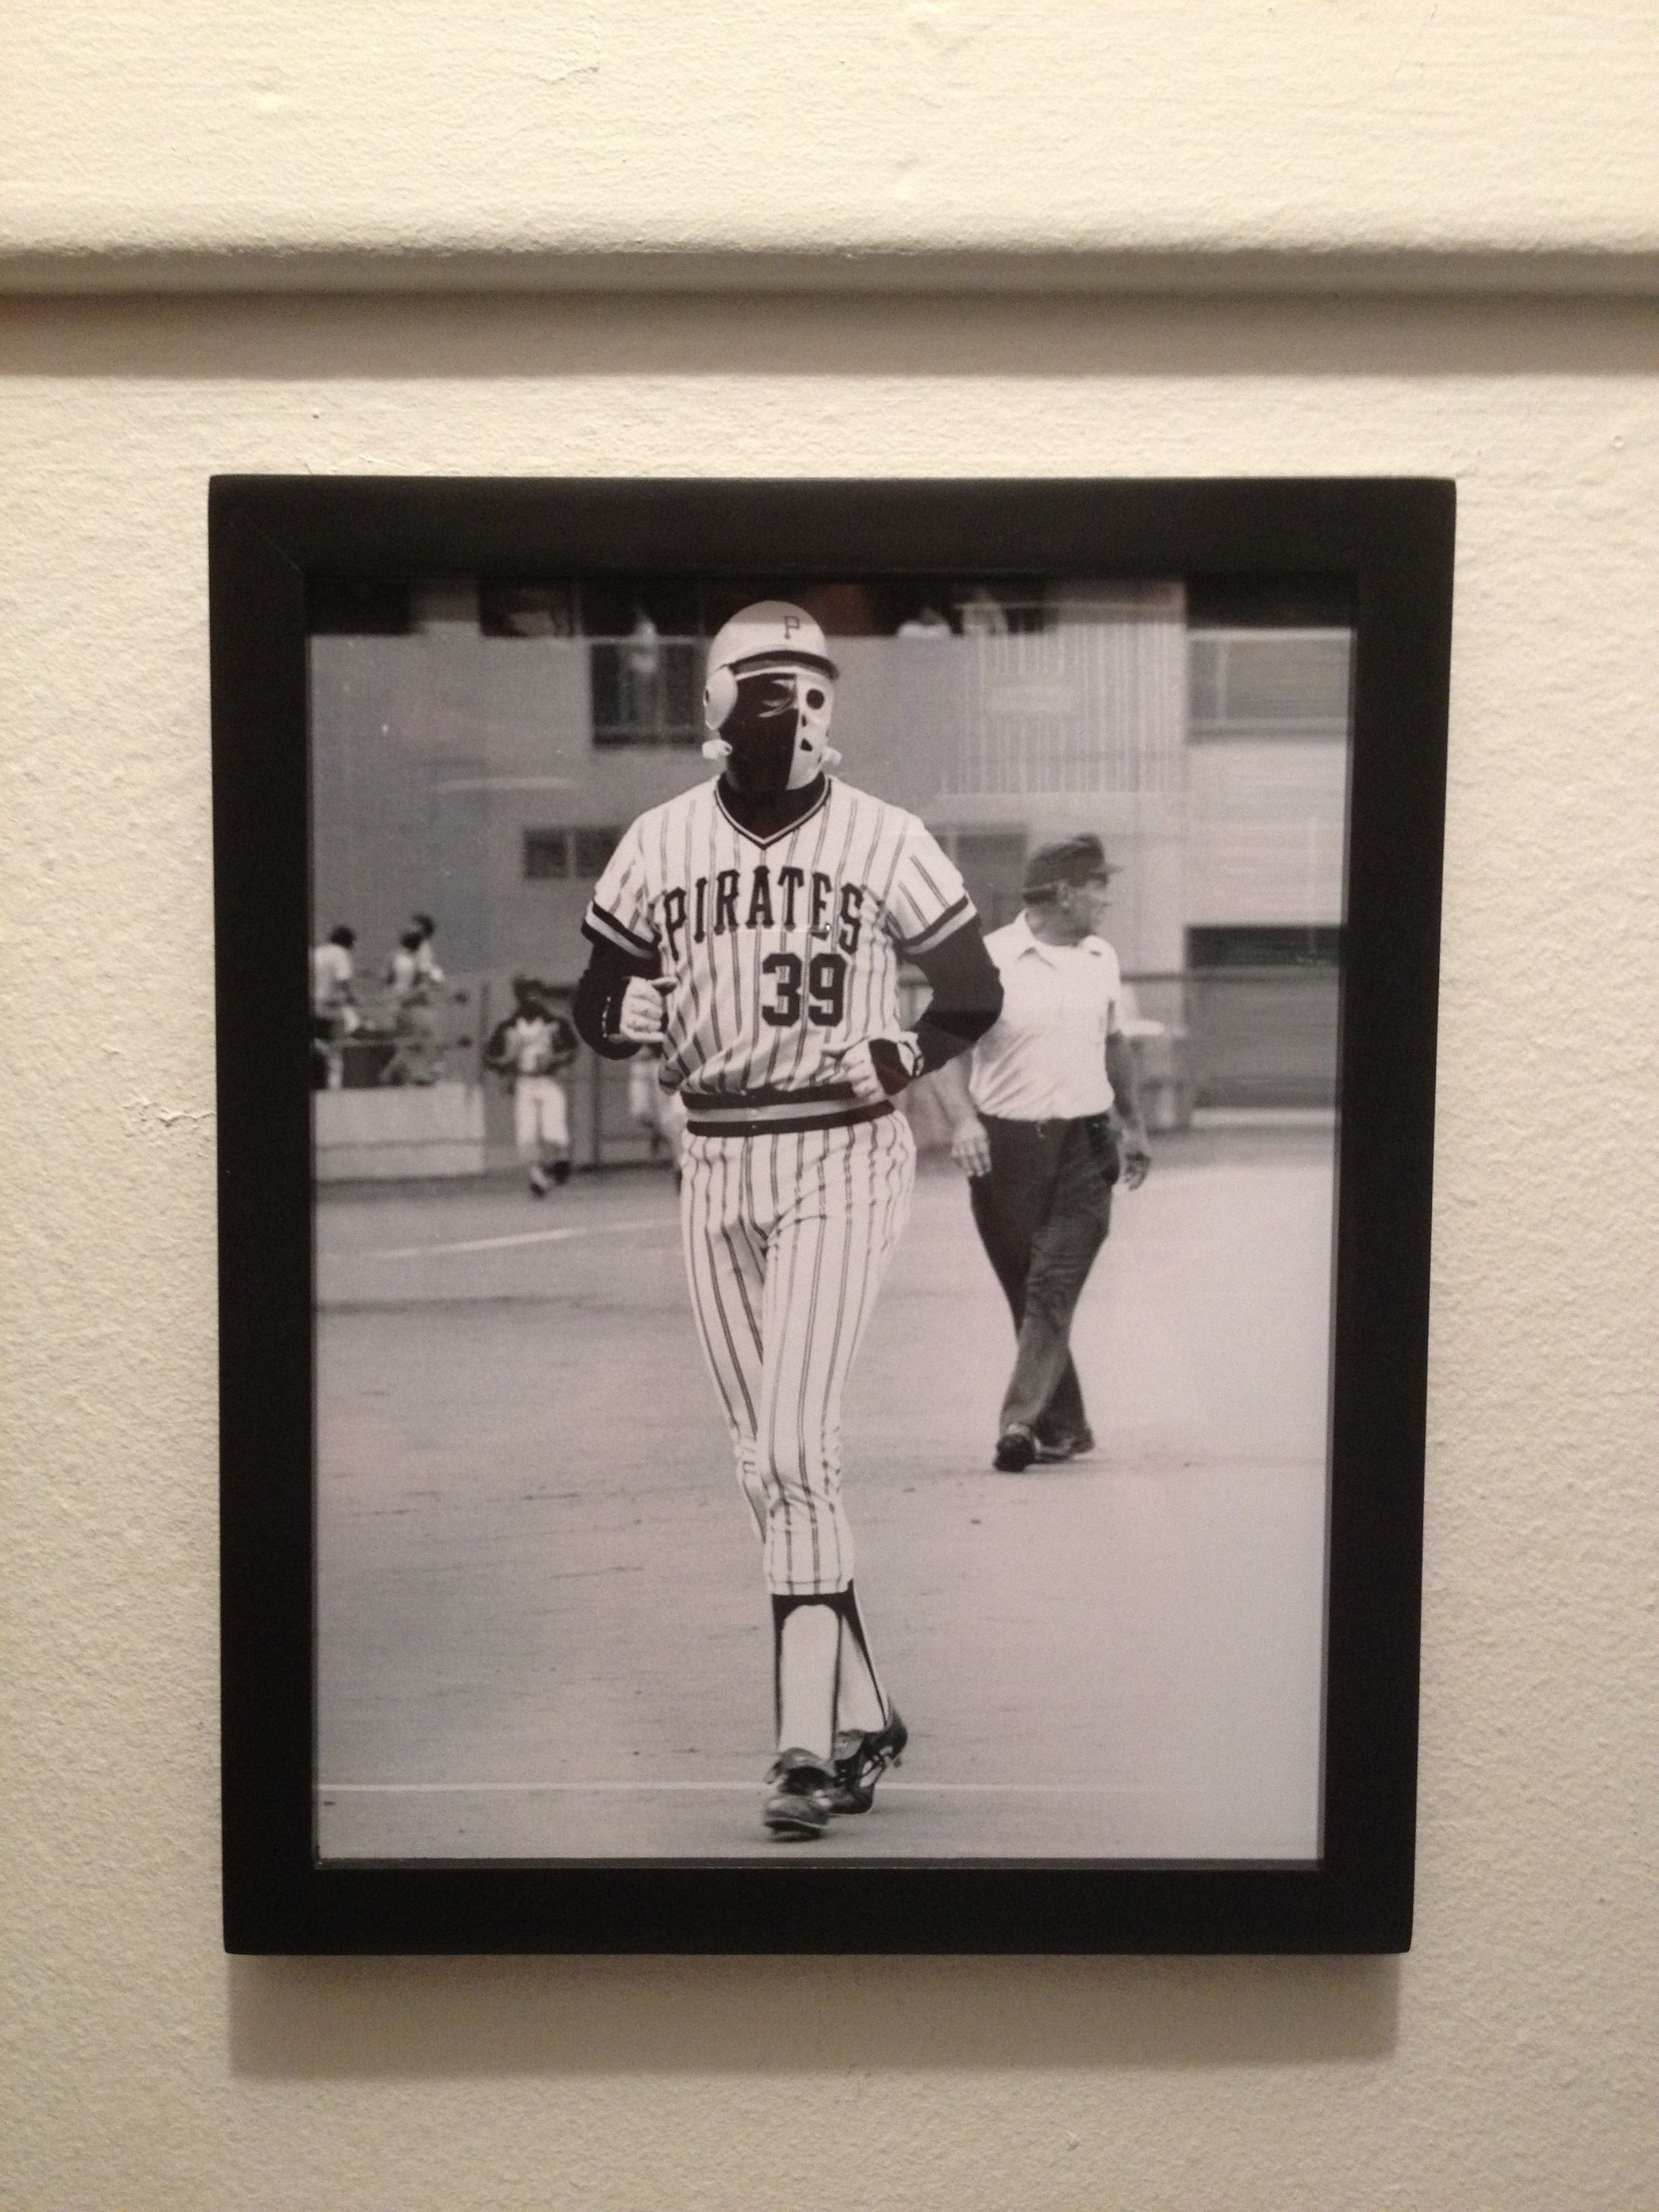 Dave Parker of the Pittsburgh Pirates poses for a portrait circa